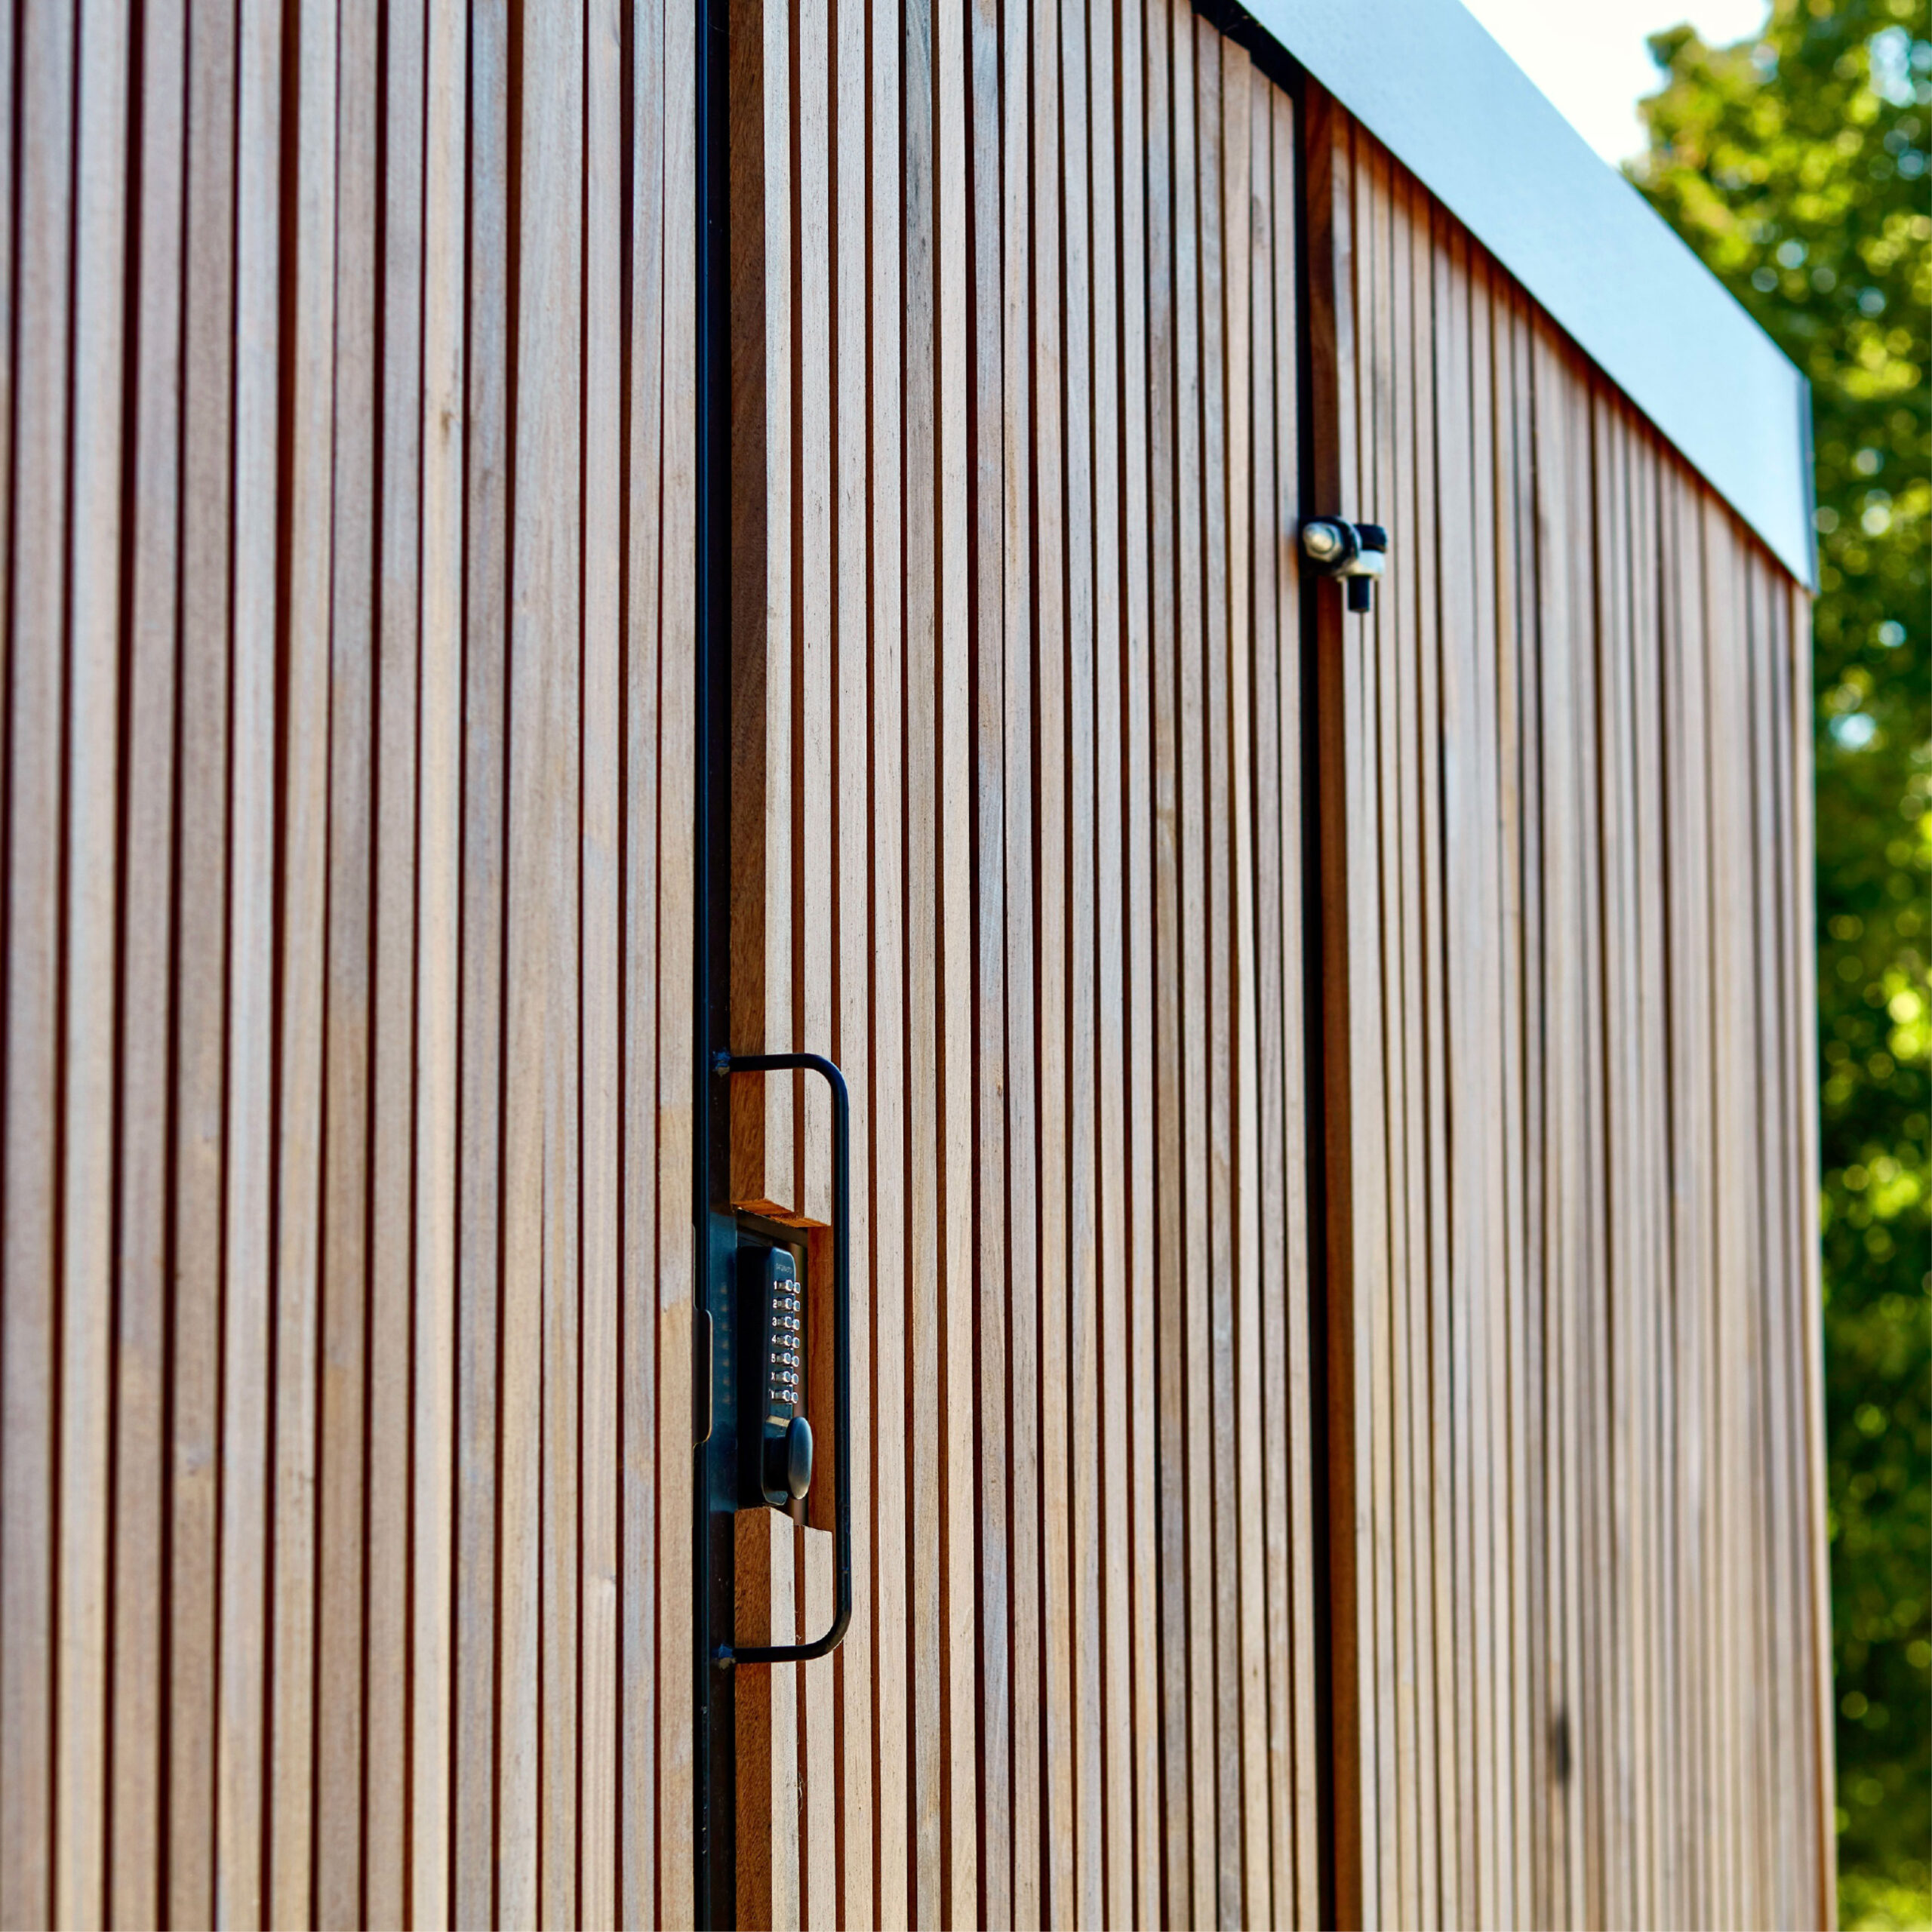 Vertical wooden slats form a wall with a sharp geometric metal handle on a door, highlighted by sunlight. a small security camera is mounted near the top of the frame.